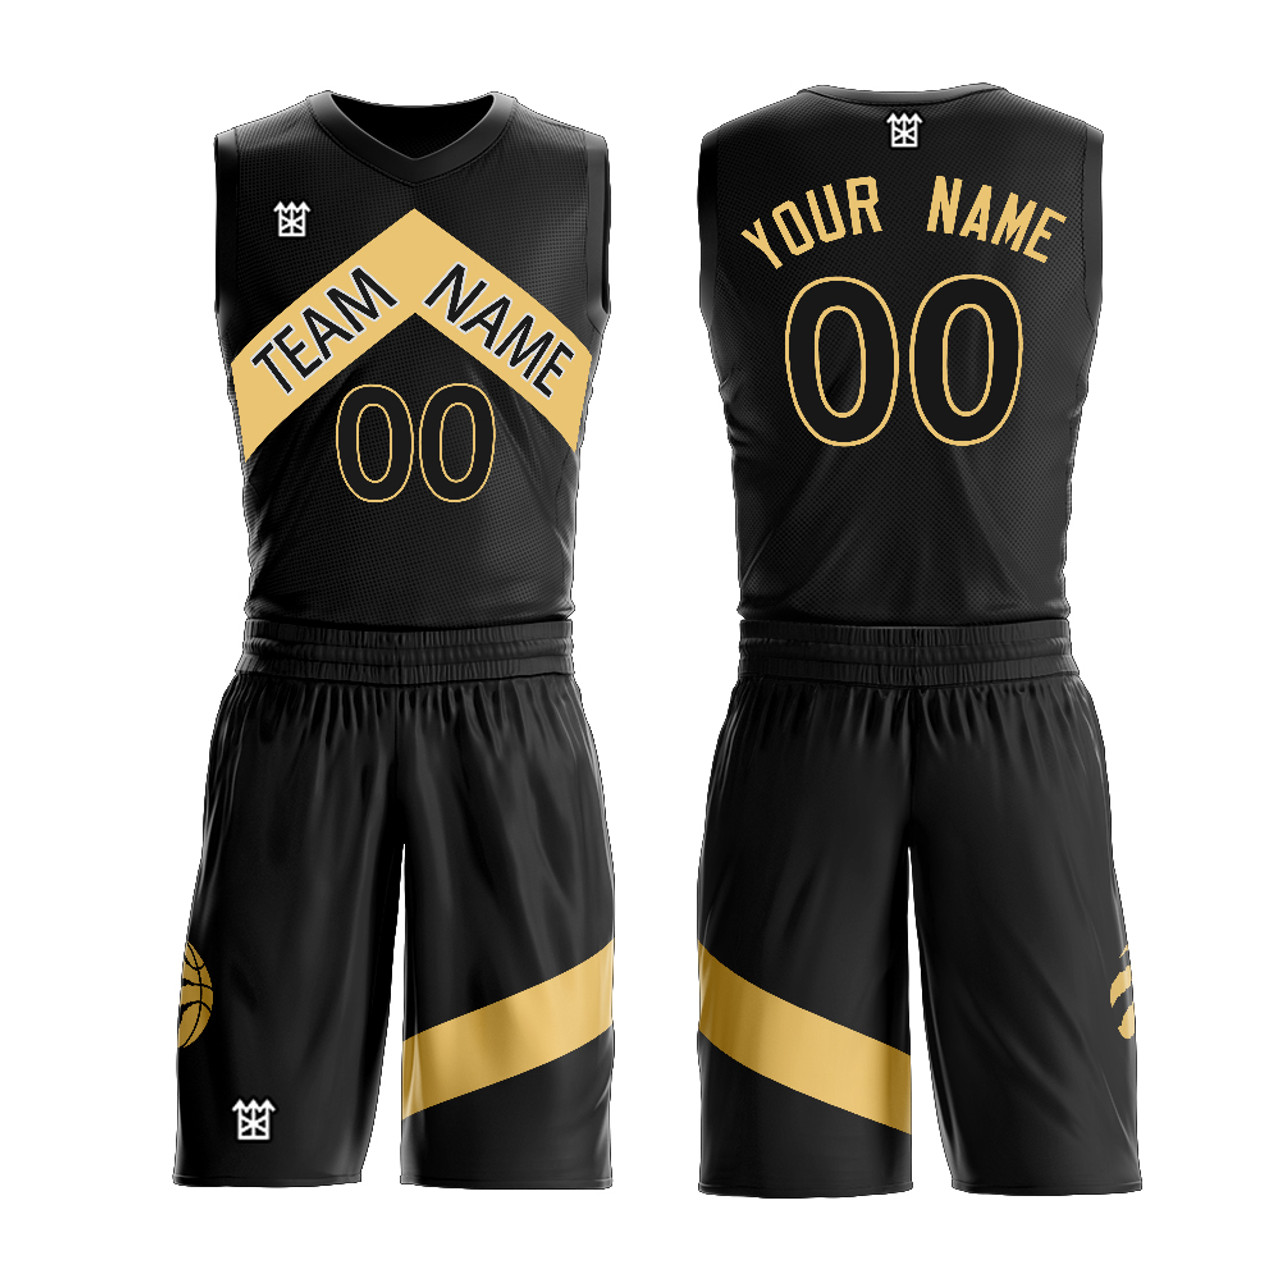 Wholesale 2021 Custom College Cheap Reversible Sublimation Youth Best Basketball  Jersey Uniform Design From m.